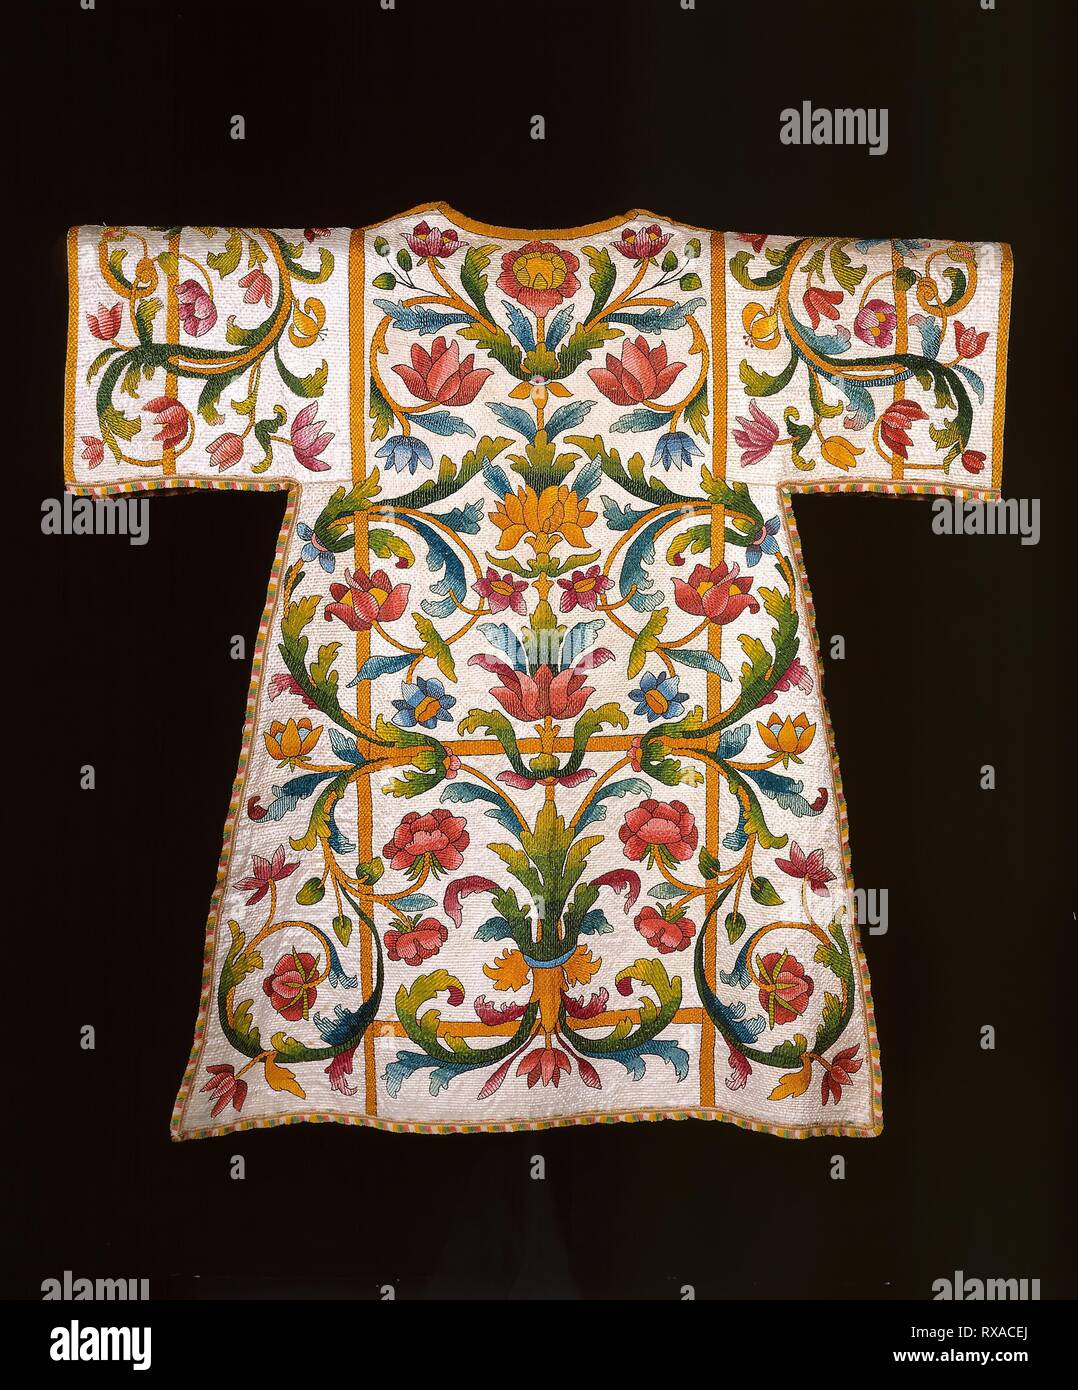 Dalmatic. Italy or Spain. Date: 1695-1705. Dimensions: 120.5 x 120.5 cm (47 1/4 x 47 1/2 in.). Hemp, plain weave; embroidered with silk in satin and split stitches; laid work and couching; edged with silk, warp-faced weft-ribbed plain weave extended weft cut woven fringe; lined with cotton, plain weave; glazed. Origin: Italy. Museum: The Chicago Art Institute. Stock Photo